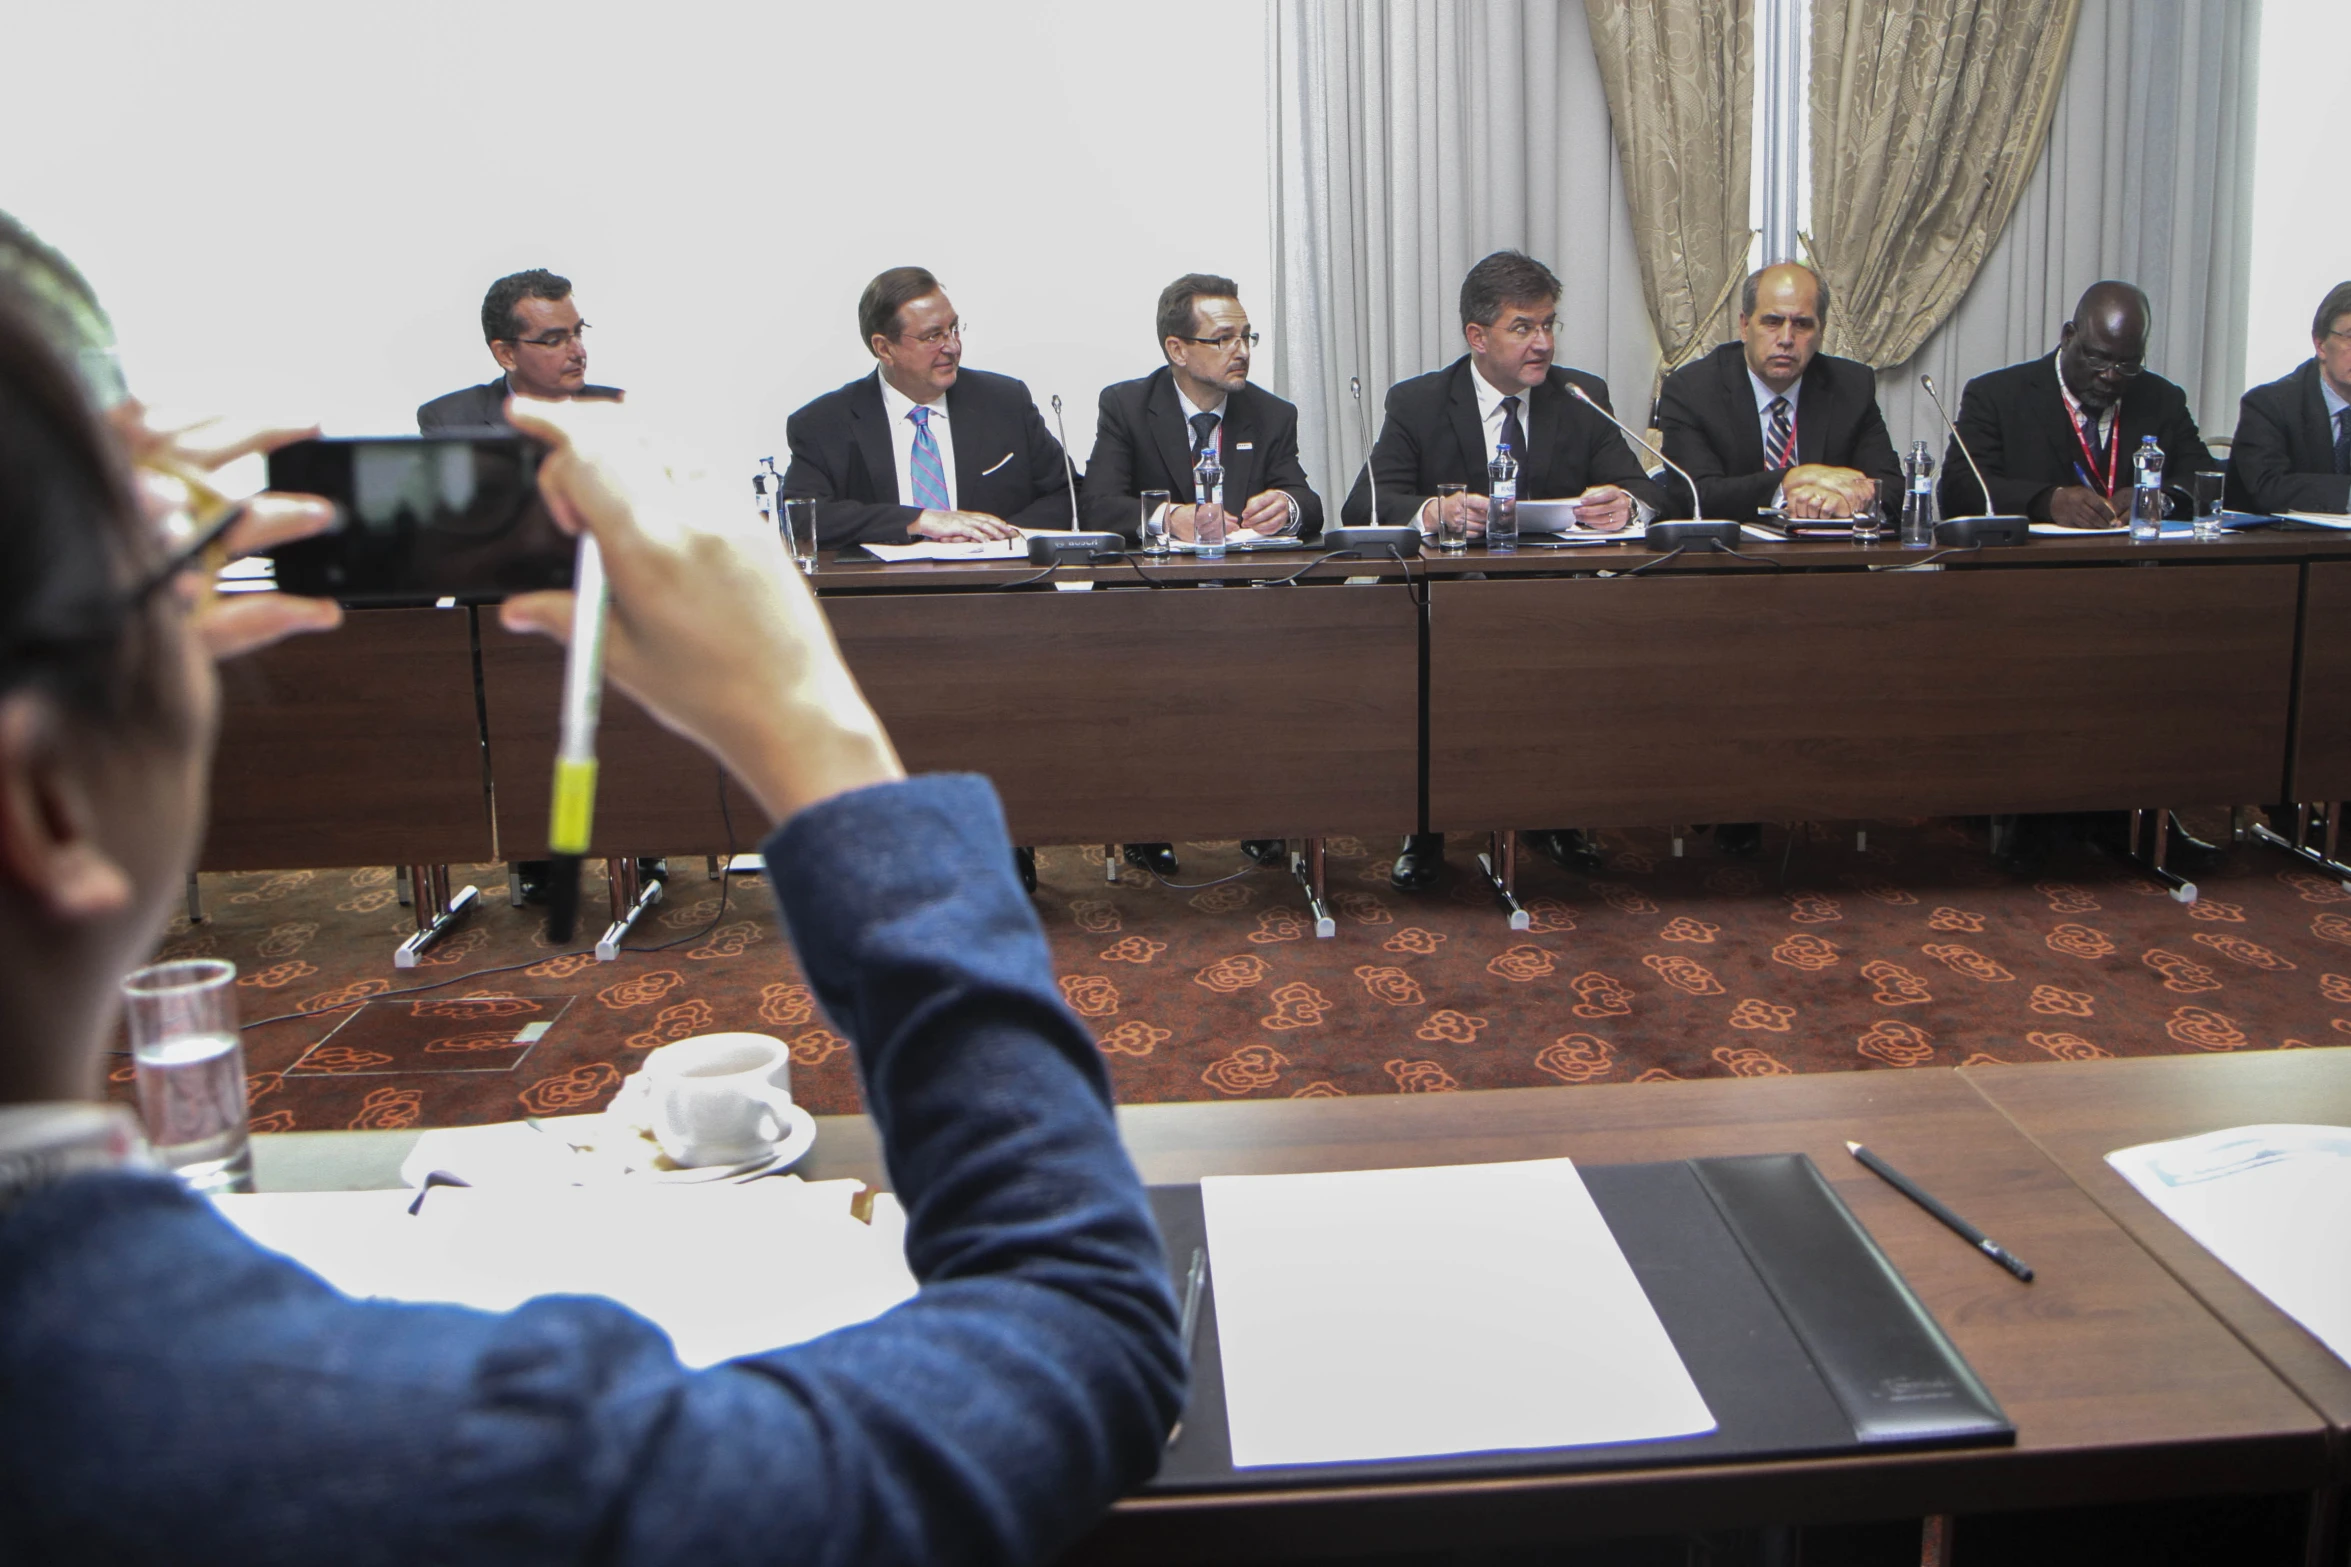 a group of men in business suits sit at the front of a conference room while someone takes a po